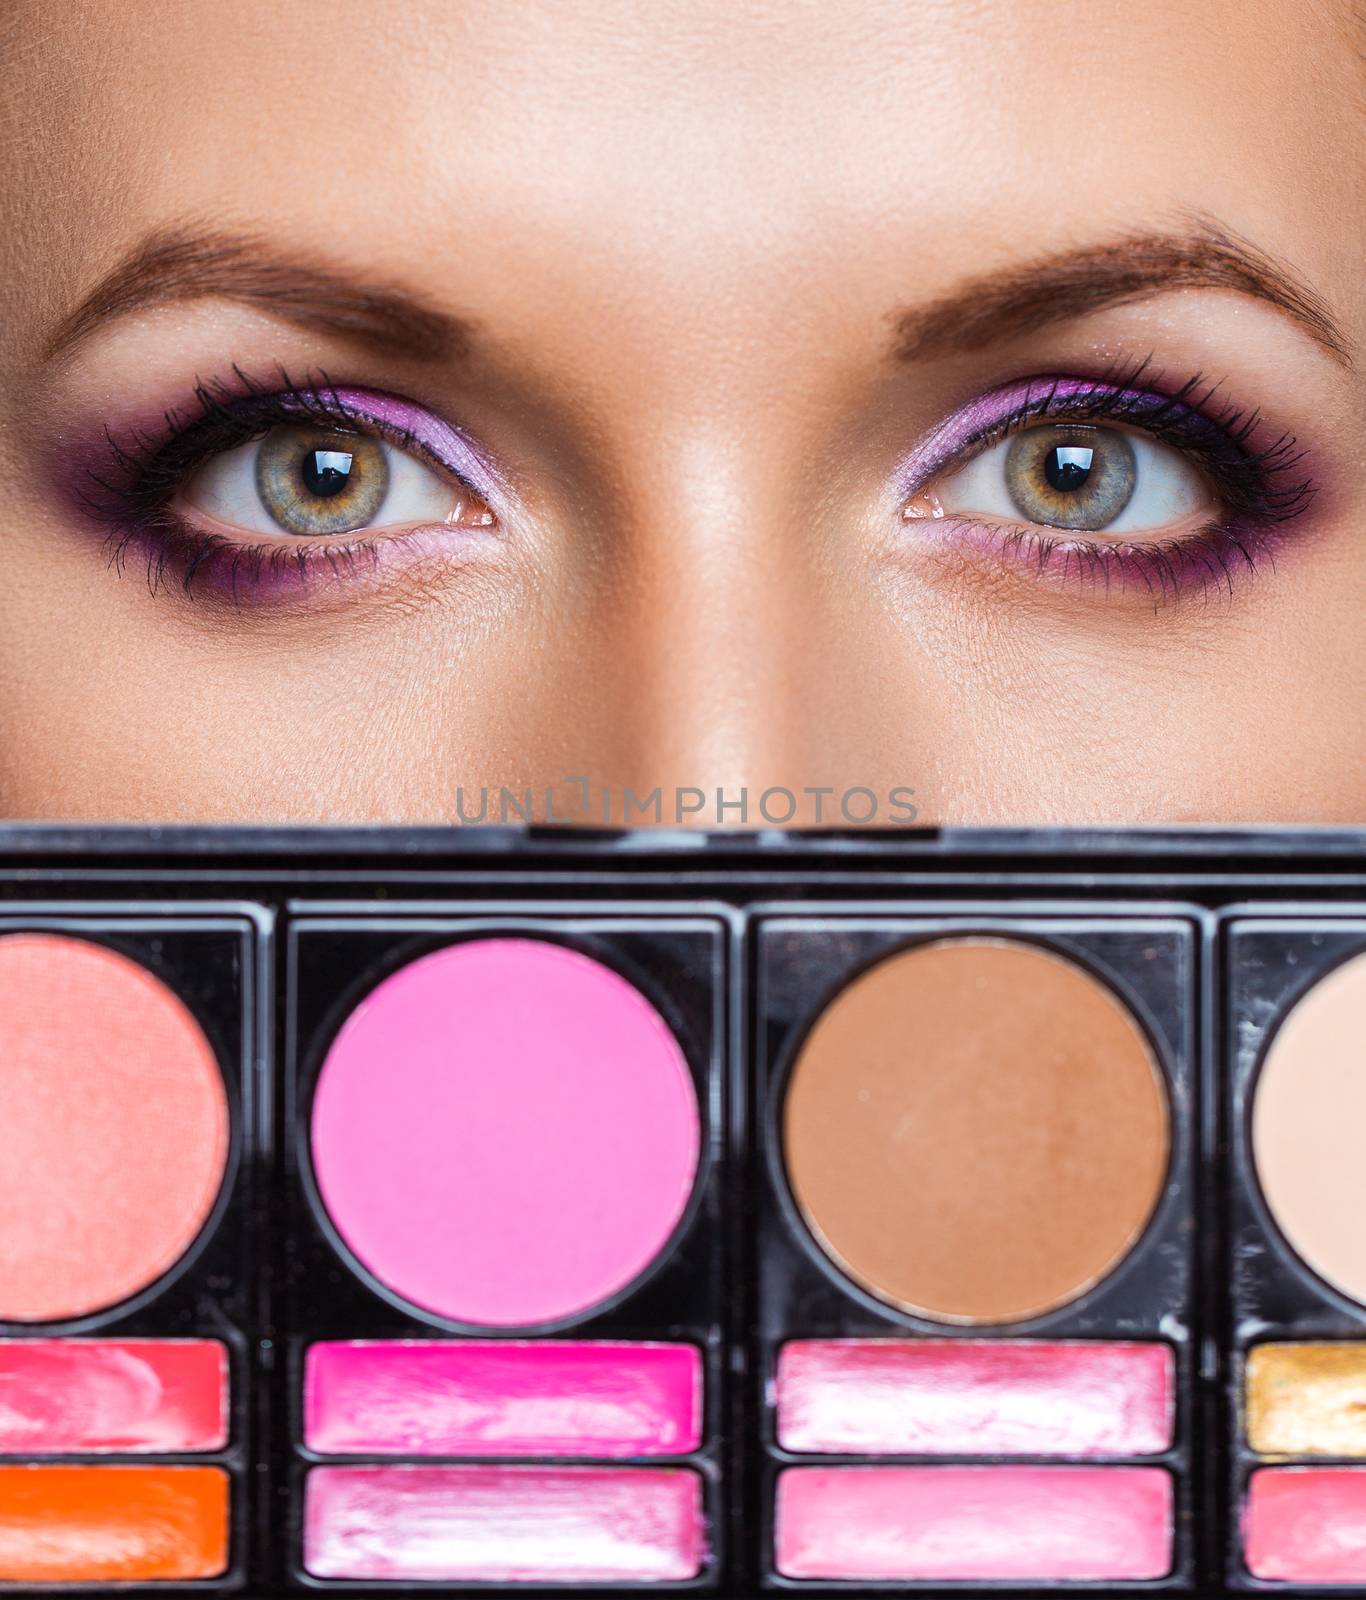 Closeup of beautiful eyes with makeup kit and glamorous makeup by vlad_star